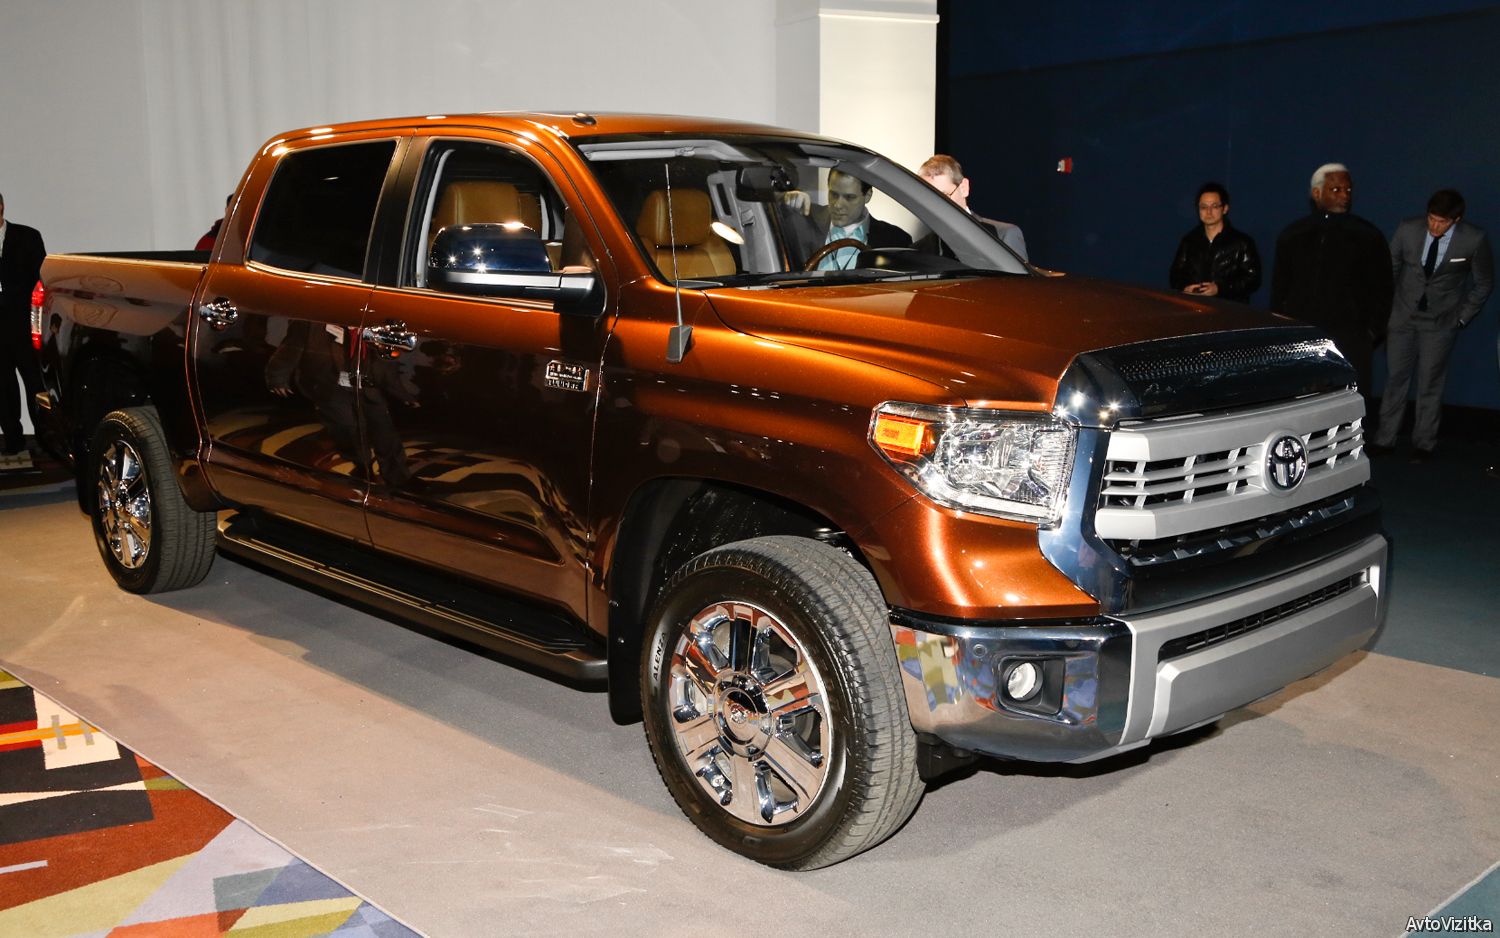 Toyota Tundra Wallpaper Collections